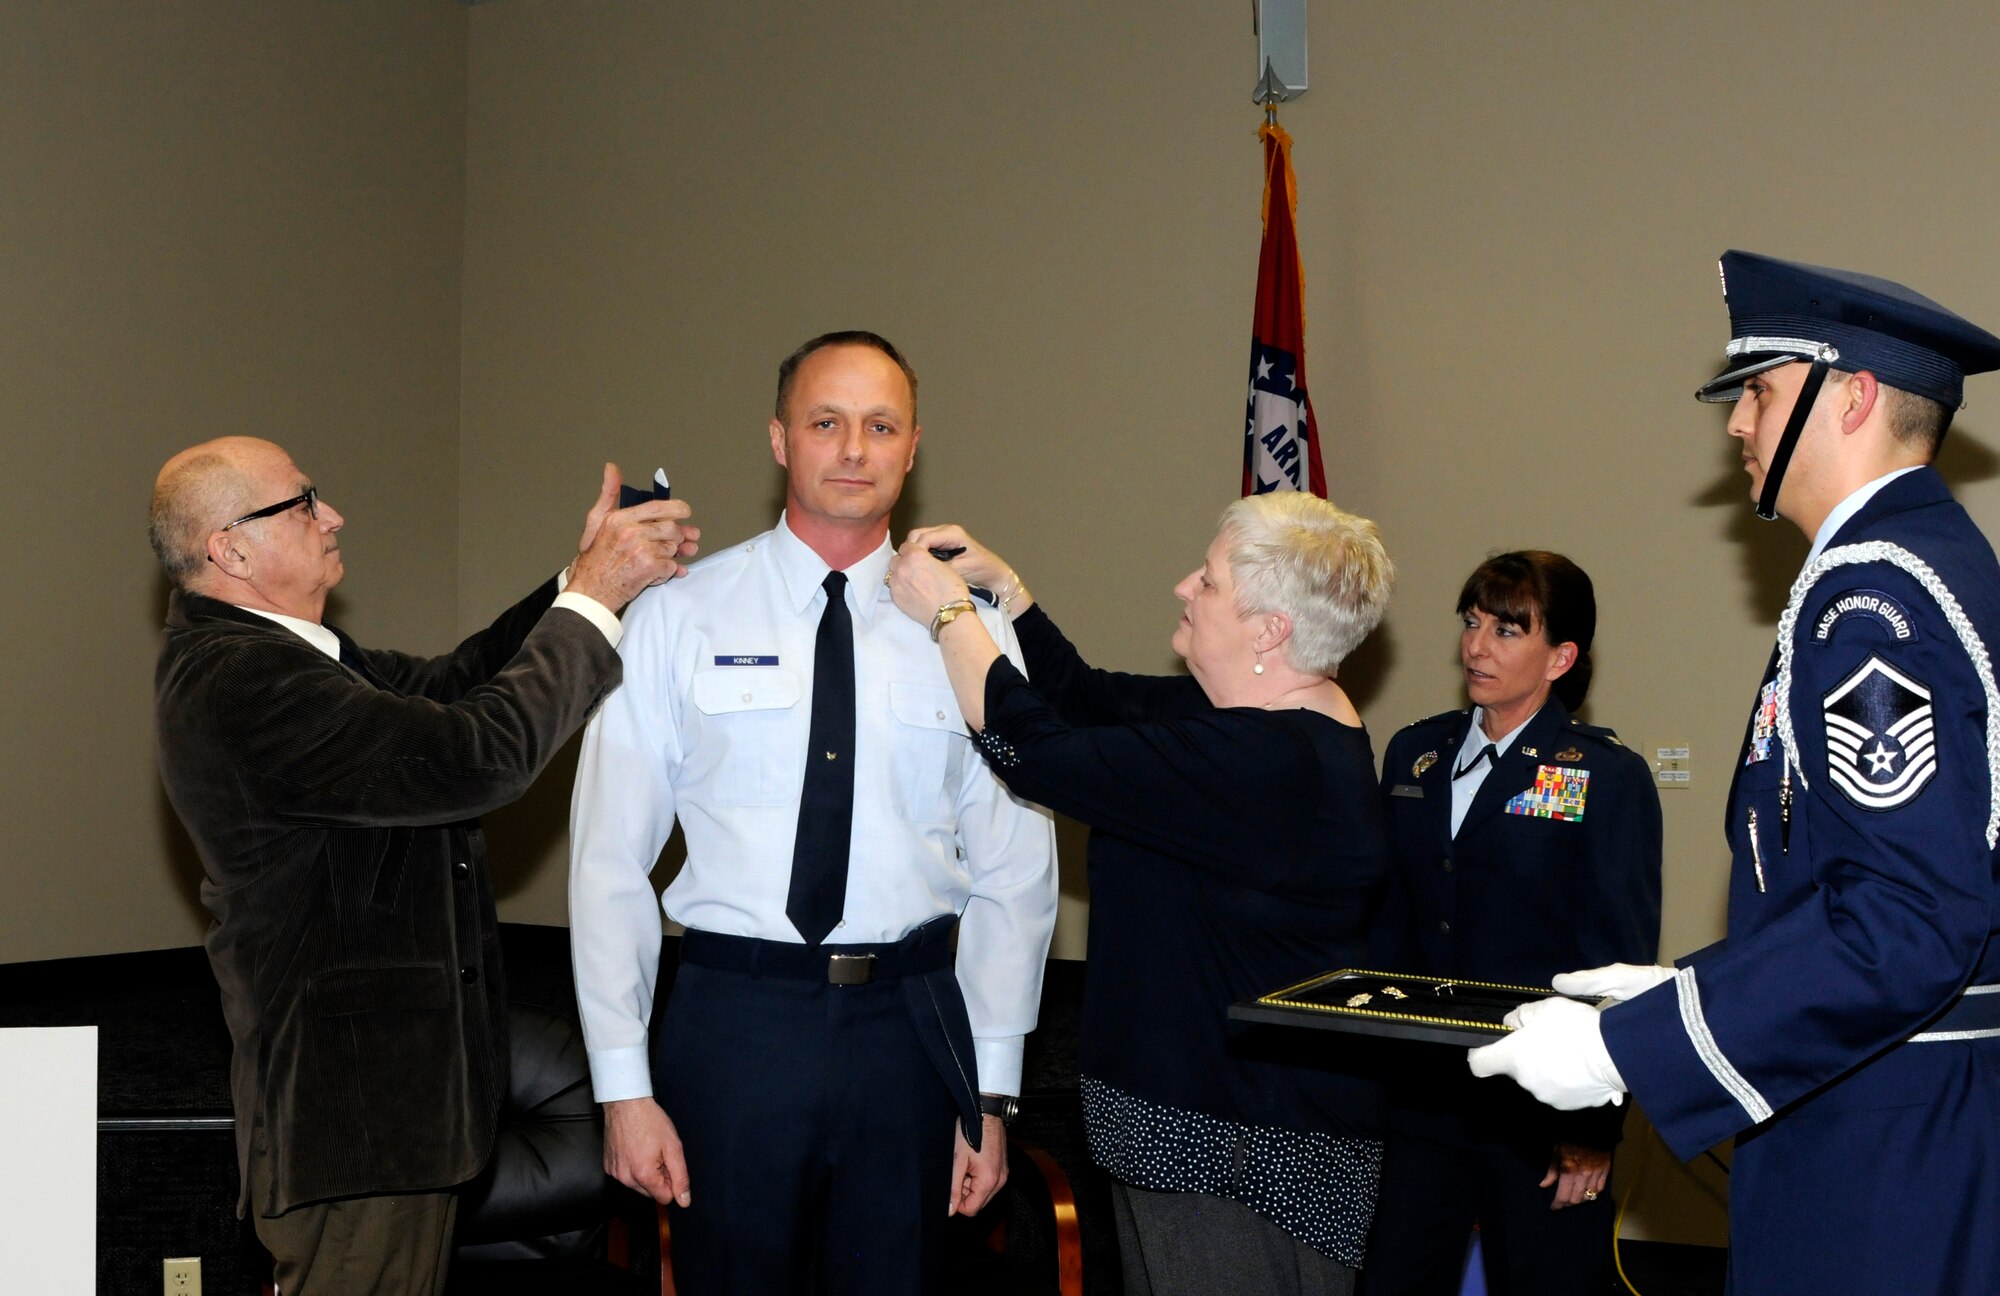 Col. Robert I. Kinney, 188th Intelligence, Surveillance and Reconnaissance Group commander, stands at attention as and his parents, retired Master Sgt. David Kinney and Alice Kinney, pin on the rank of colonel Feb. 8, 2015, during a formal promotion ceremony held at Ebbing Air National Guard Base, Fort Smith, Ark. Robert Kinney joined the Air National Guard in 1990 and has spent time in various positions throughout the country in the intelligence career field. The ceremony was presided by his wife, Col. Paige Kinney, director of ISR at the Continental U.S. North American Aerospace Defense Command Region, 1st Air Force, Air Forces Northern, Tyndall Air Force Base, Fla. Master Sgt. Michael Aponte, 288th Operations Support Squadron member, was the proffer during the ceremony. (U.S. Air National Guard photo by Staff Sgt. Hannah Dickerson/released)